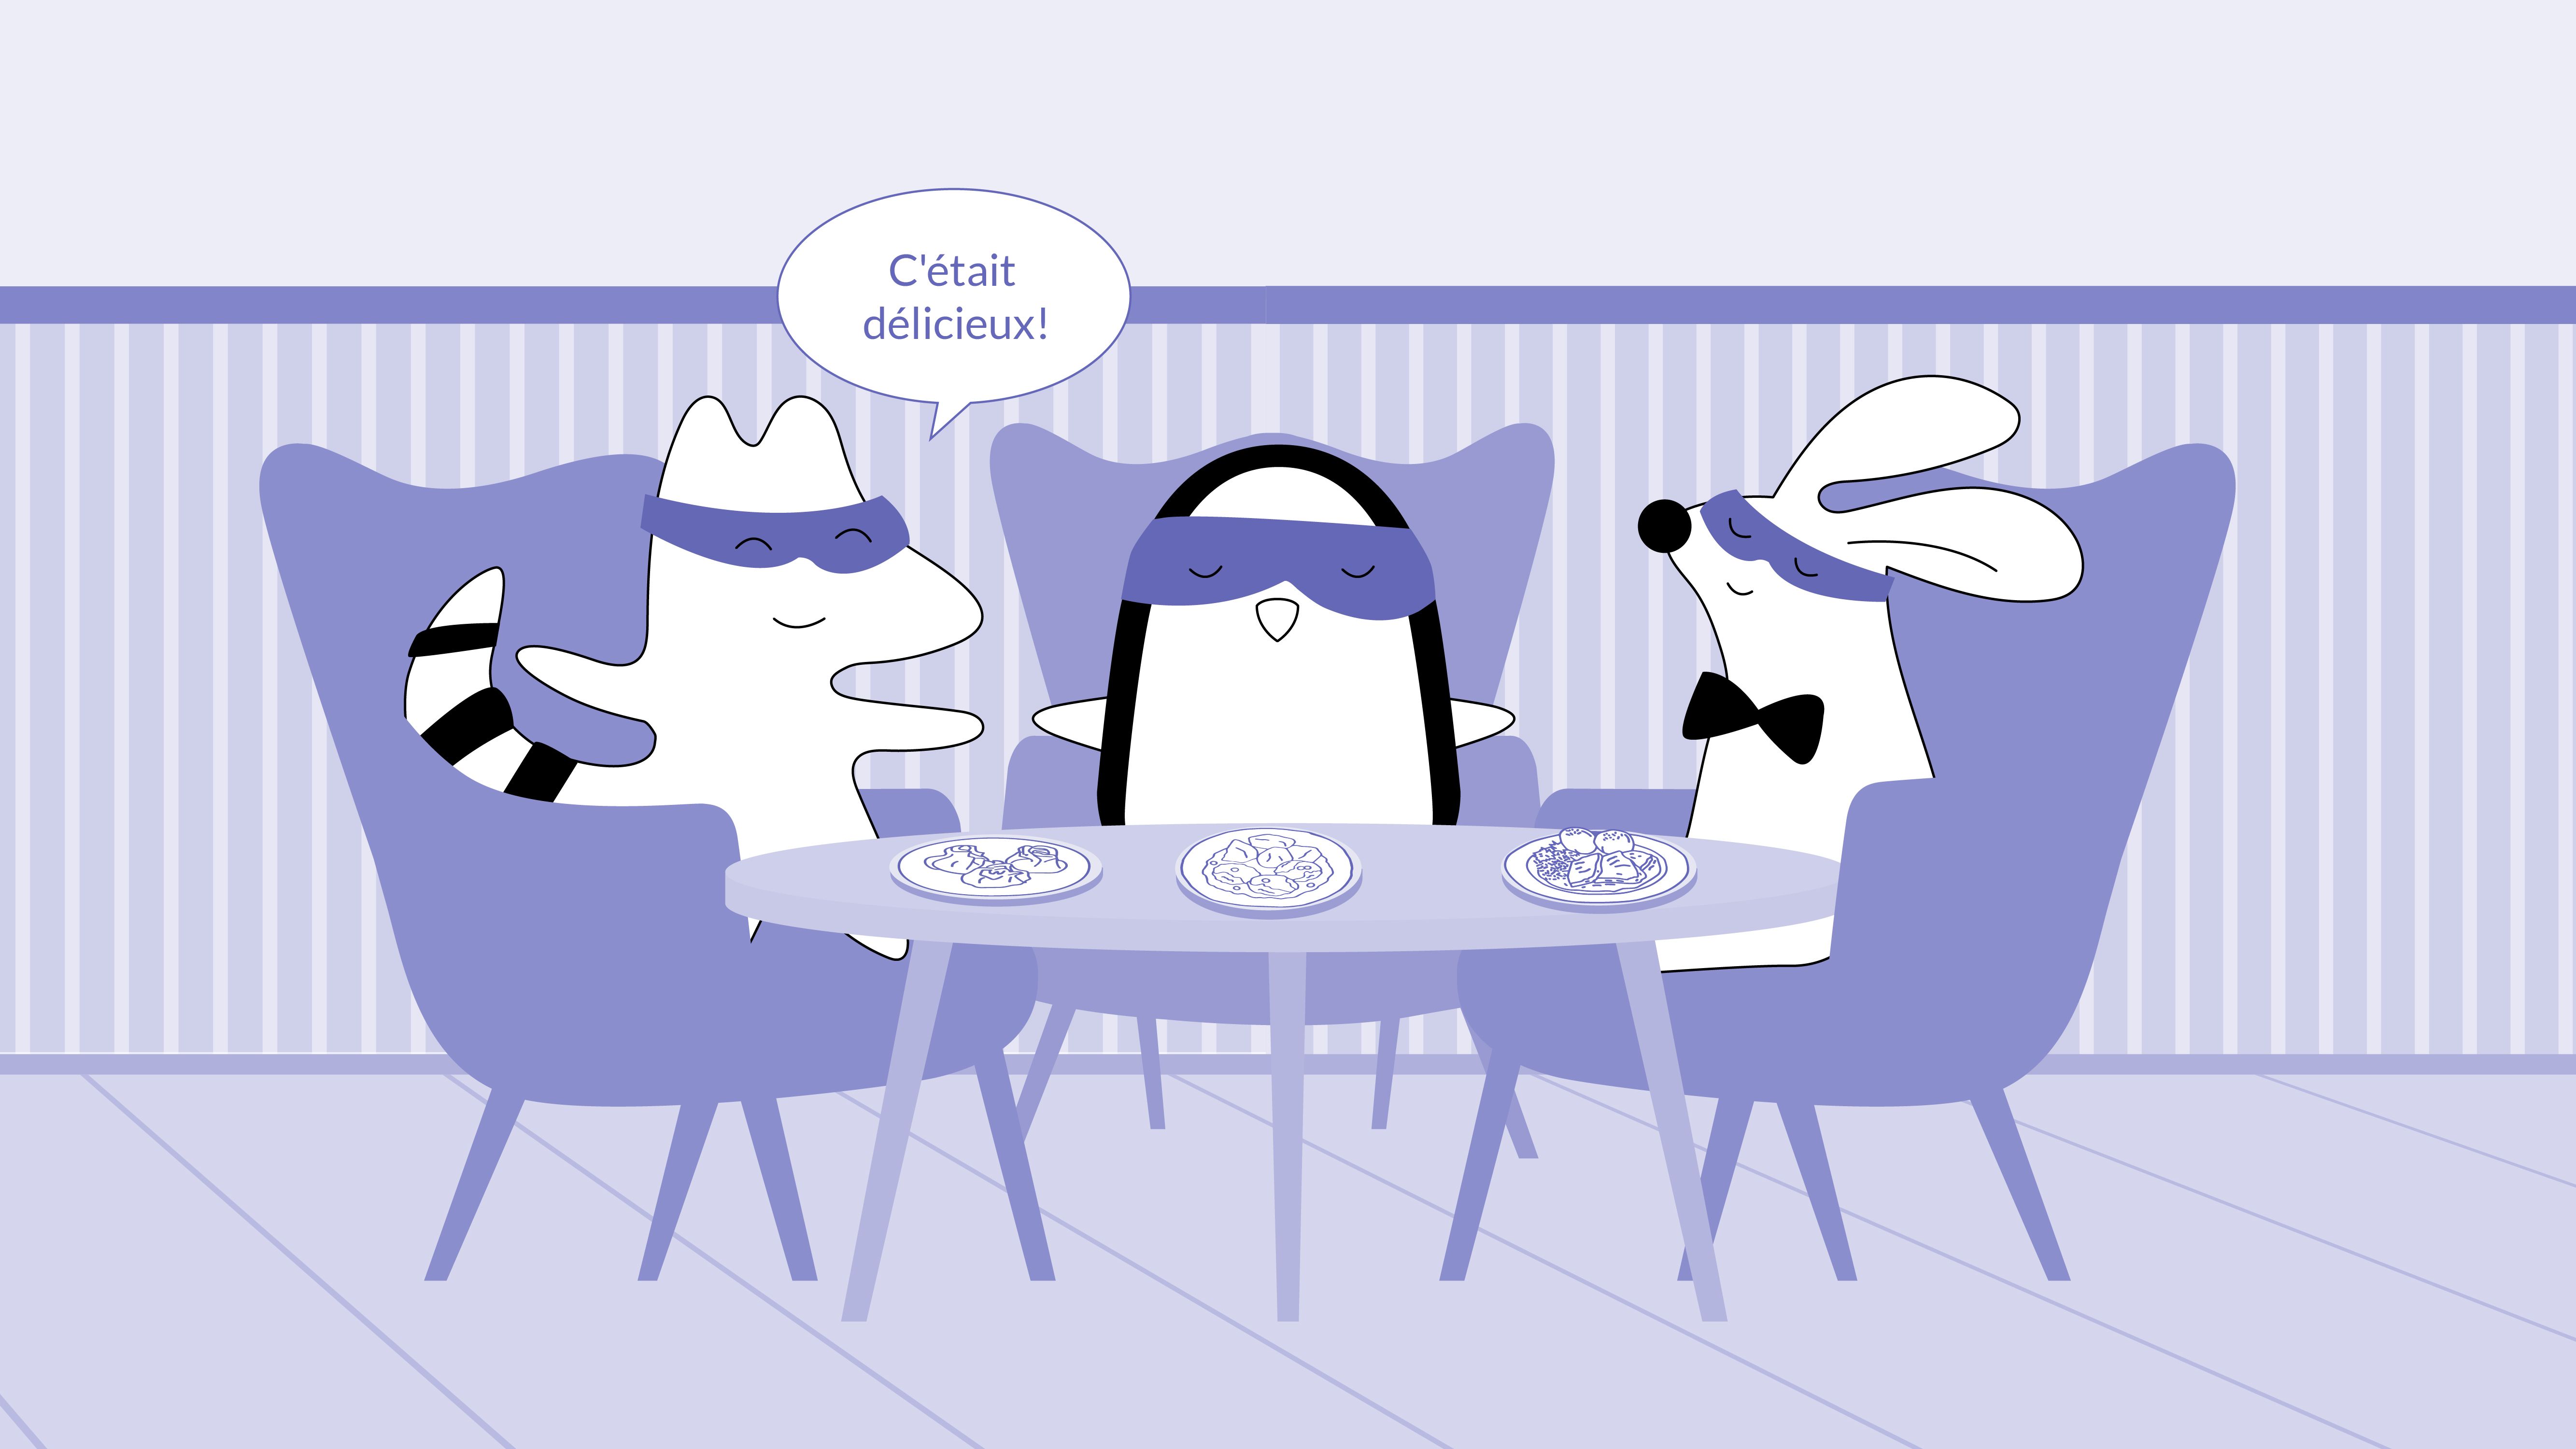 Mr. Rabbit and Soren finishing their meals, saing together: “C'était délicieux !” amazed by the food